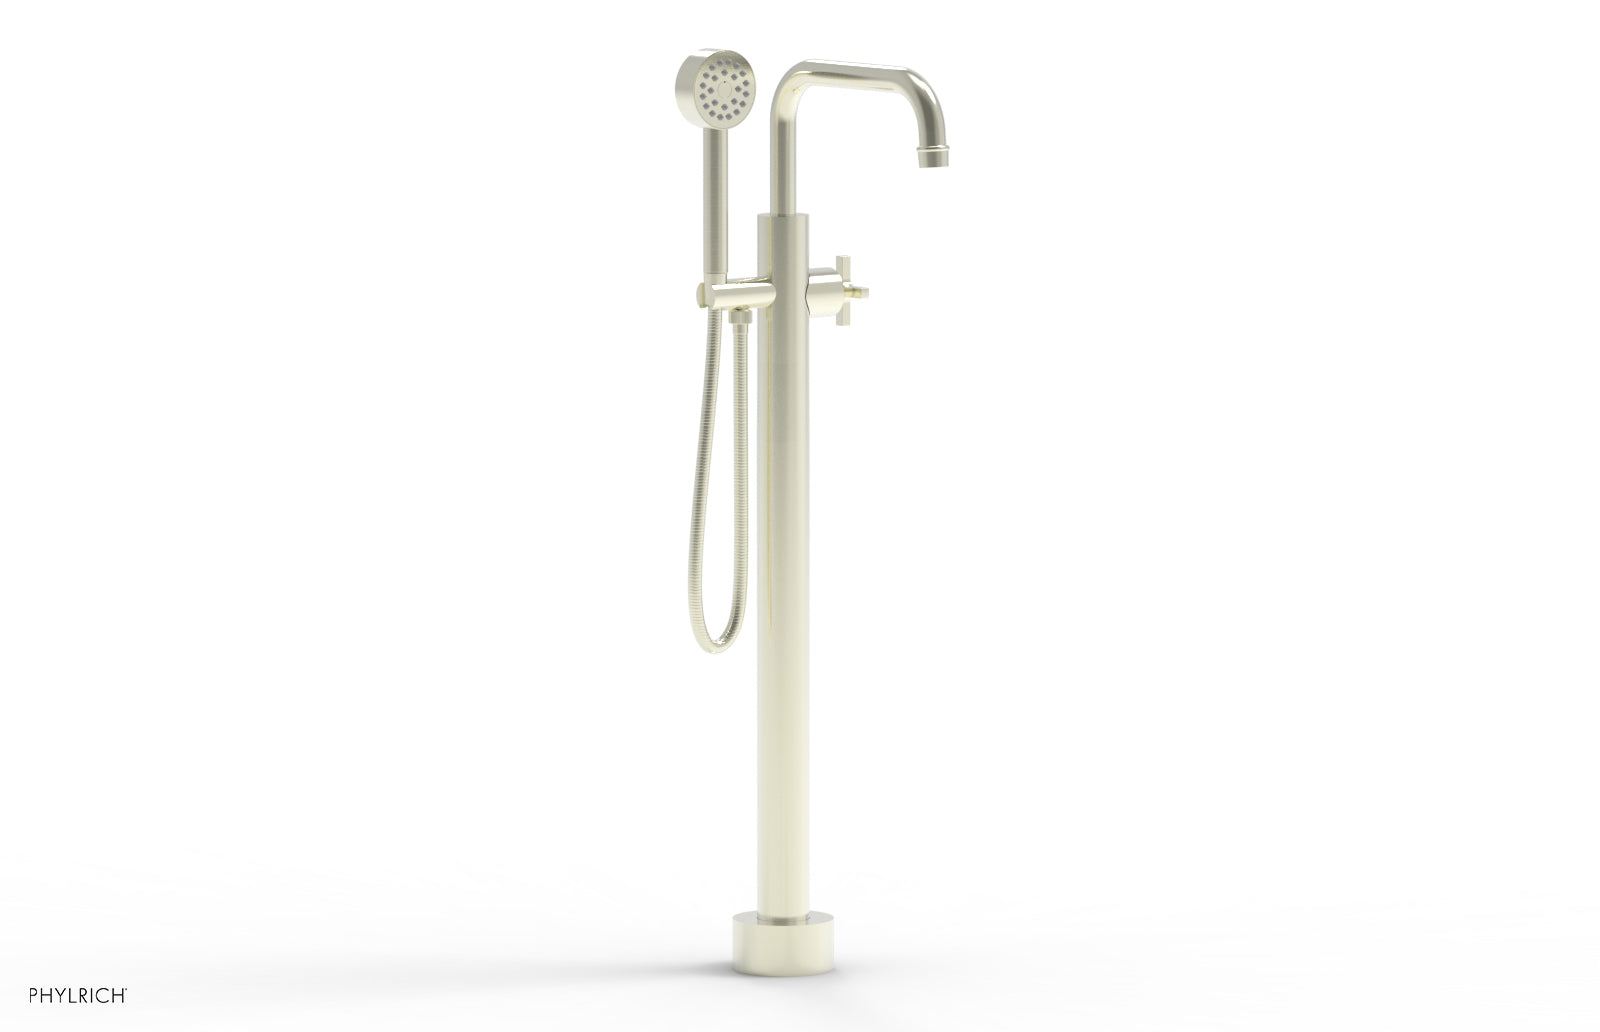 Phylrich HEX MODERN Tall Floor Mount Tub Filler - Cross Handle with Hand Shower